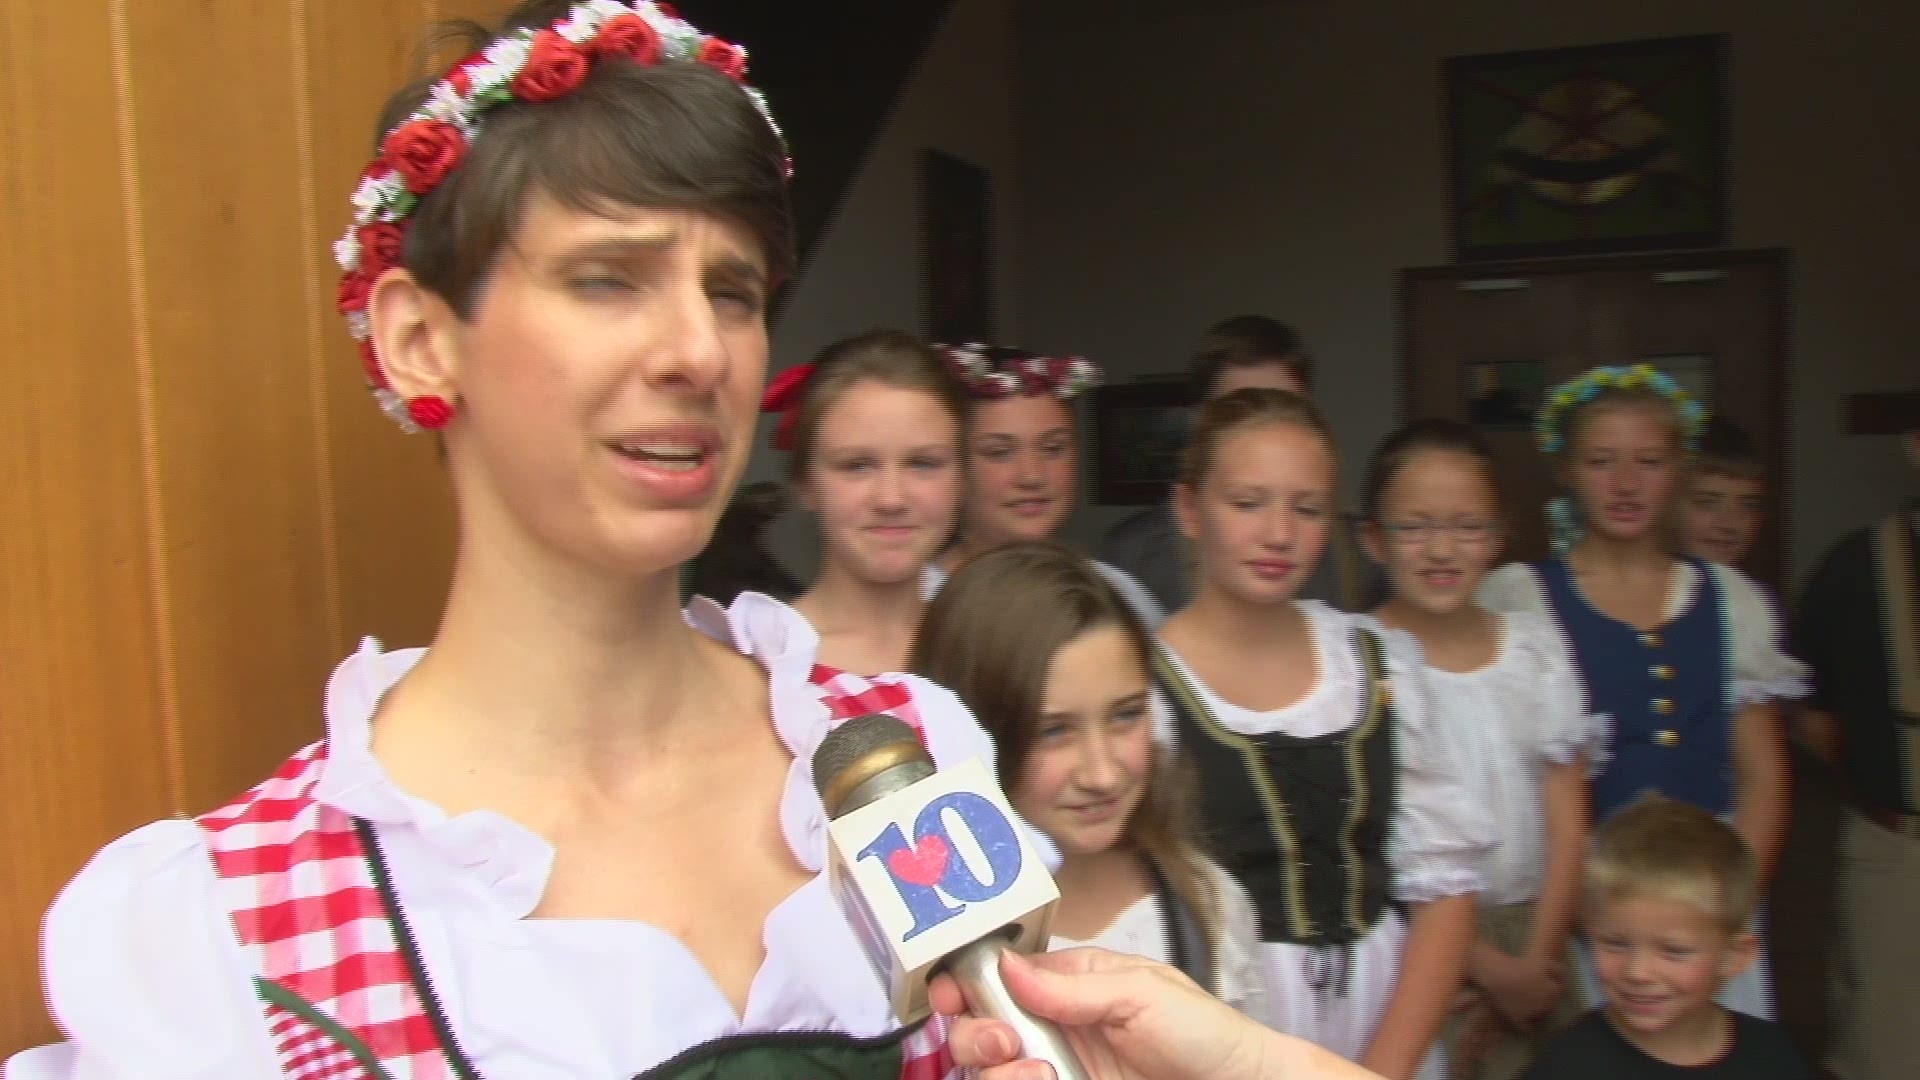 Germanfest is Saturday August 26 at First Lutheran Church on Broadway in North Knoxville